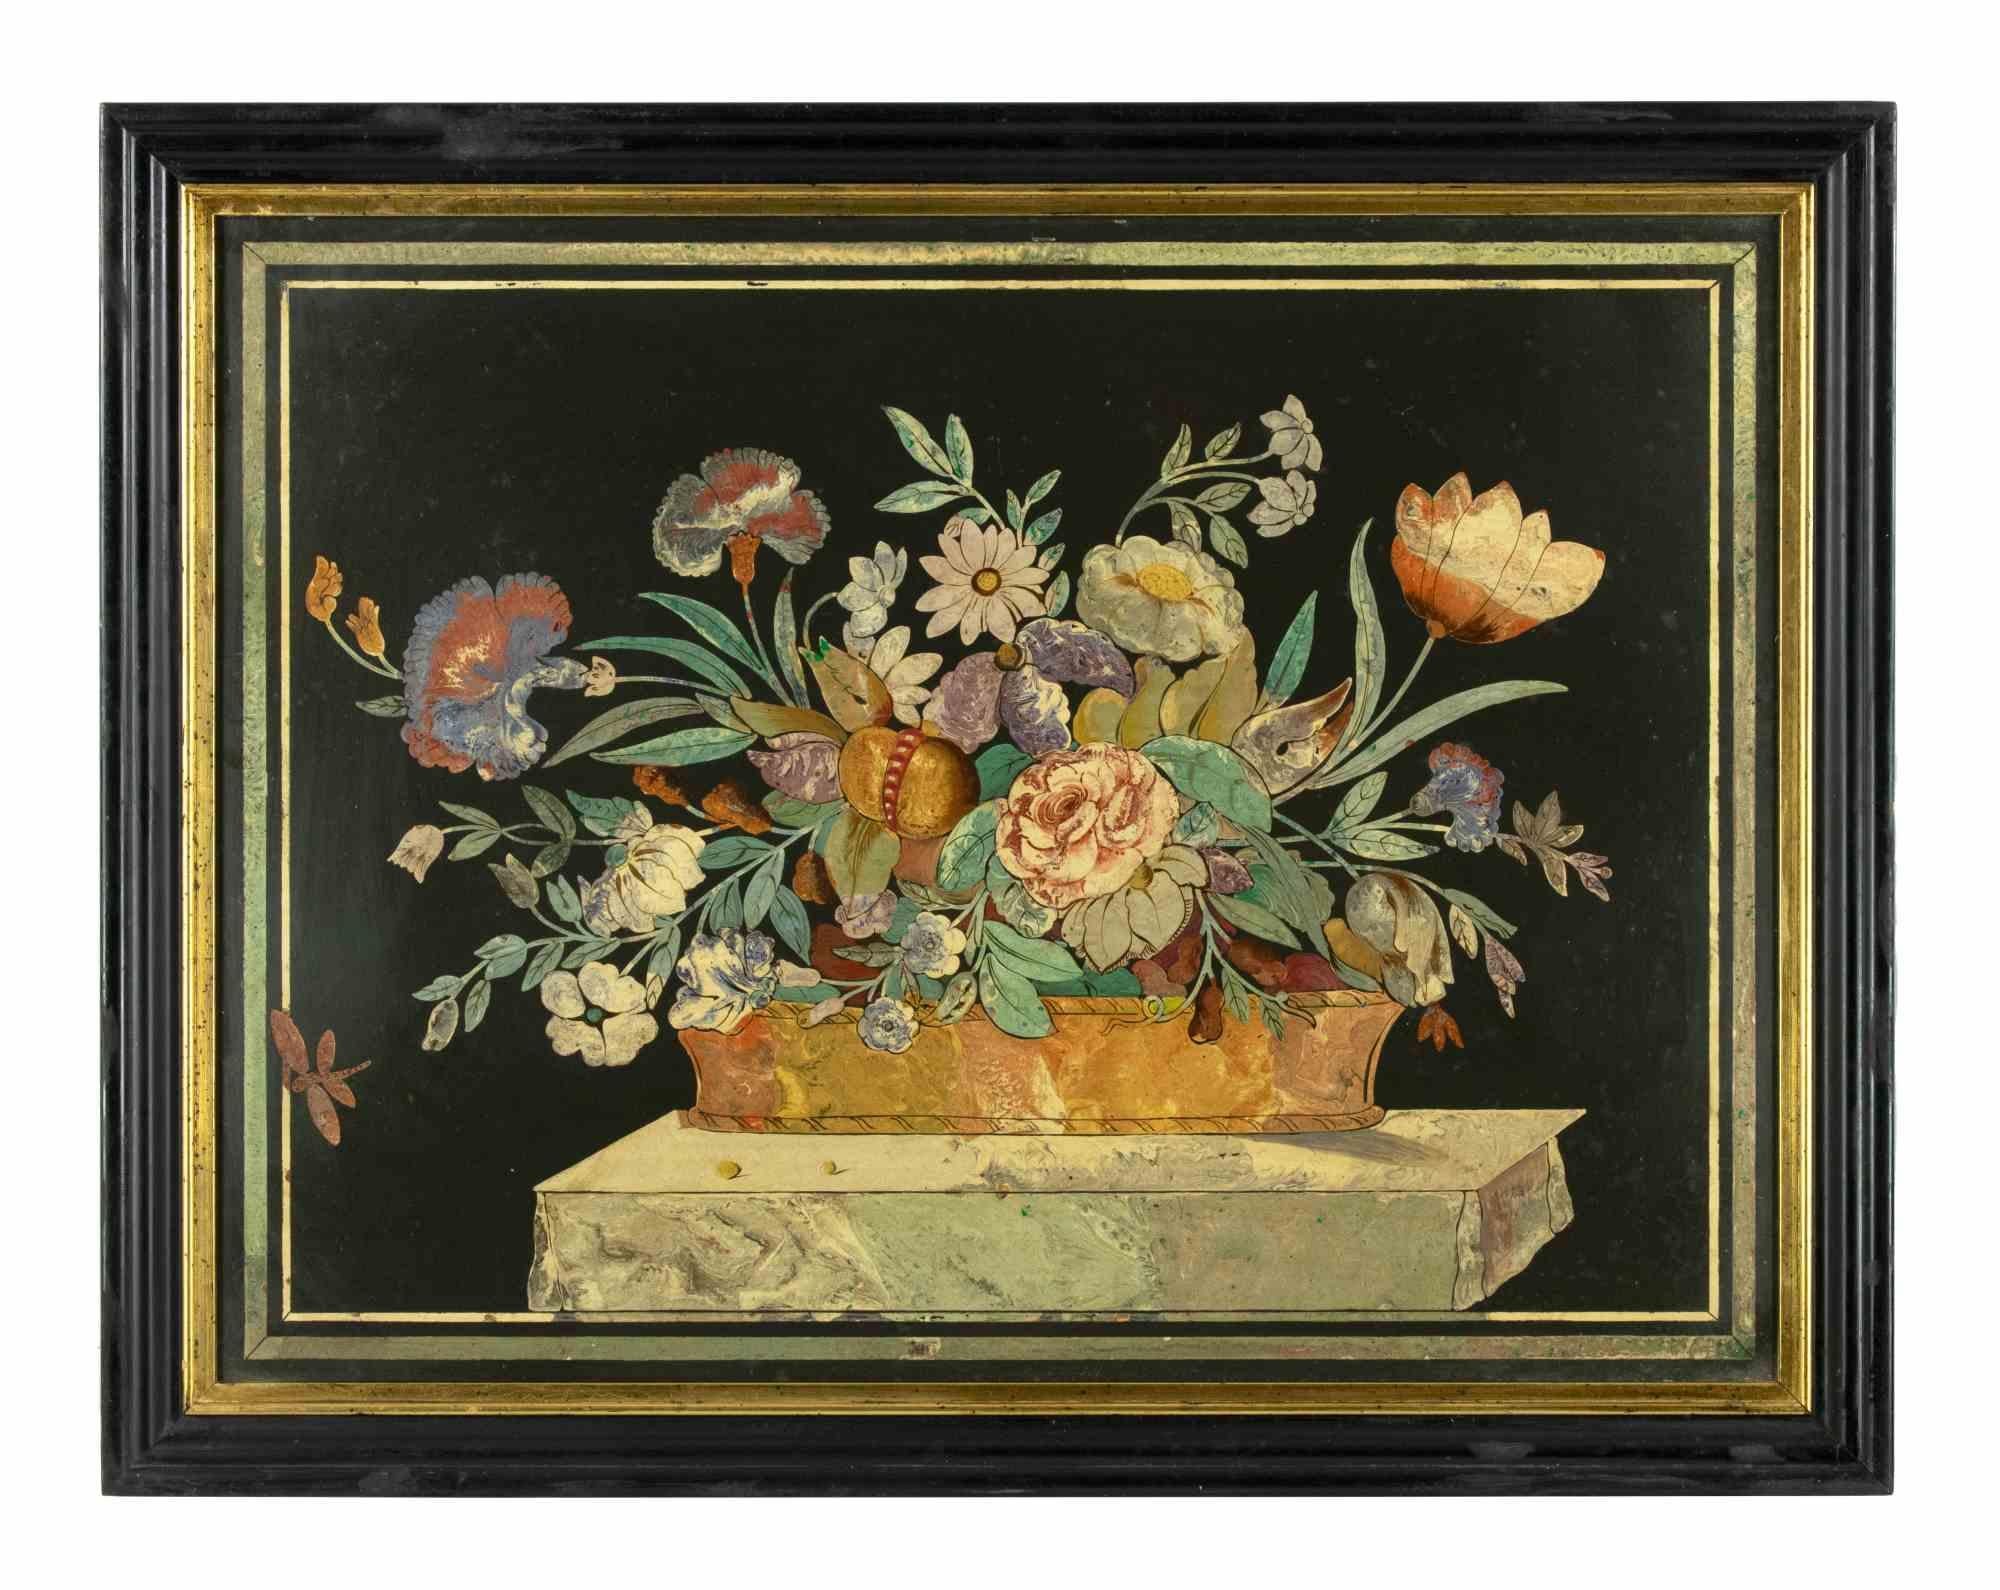 Flower -  Painting in Scagliola - 19th Century - Mixed Media Art by Unknown